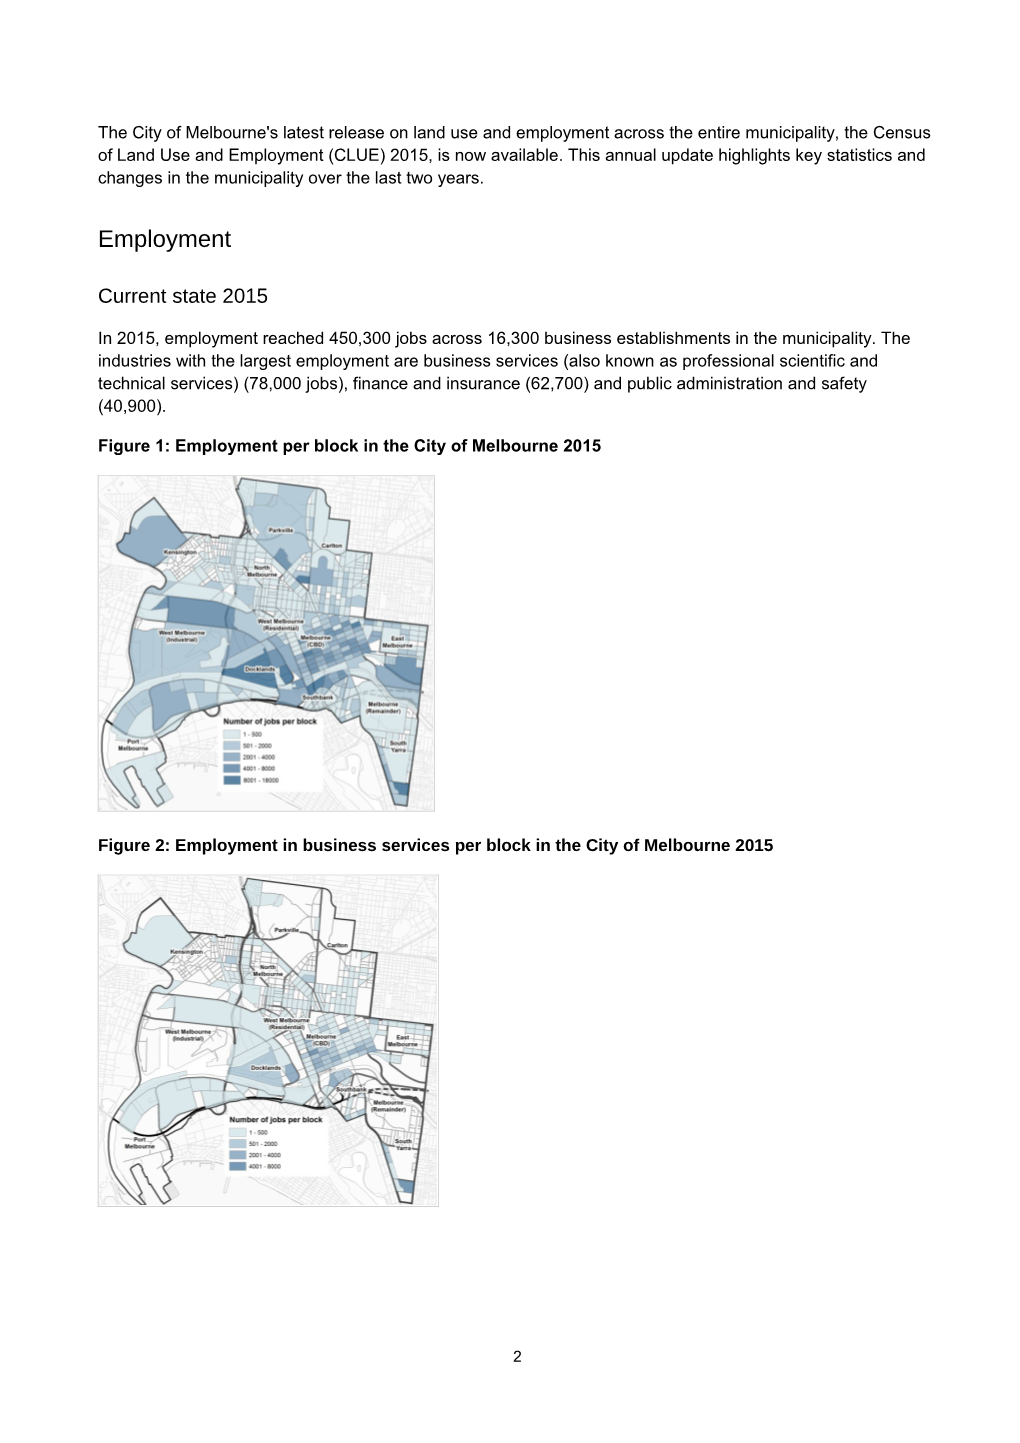 City of Melbourne Census of Land Use and Employment Profile 2015